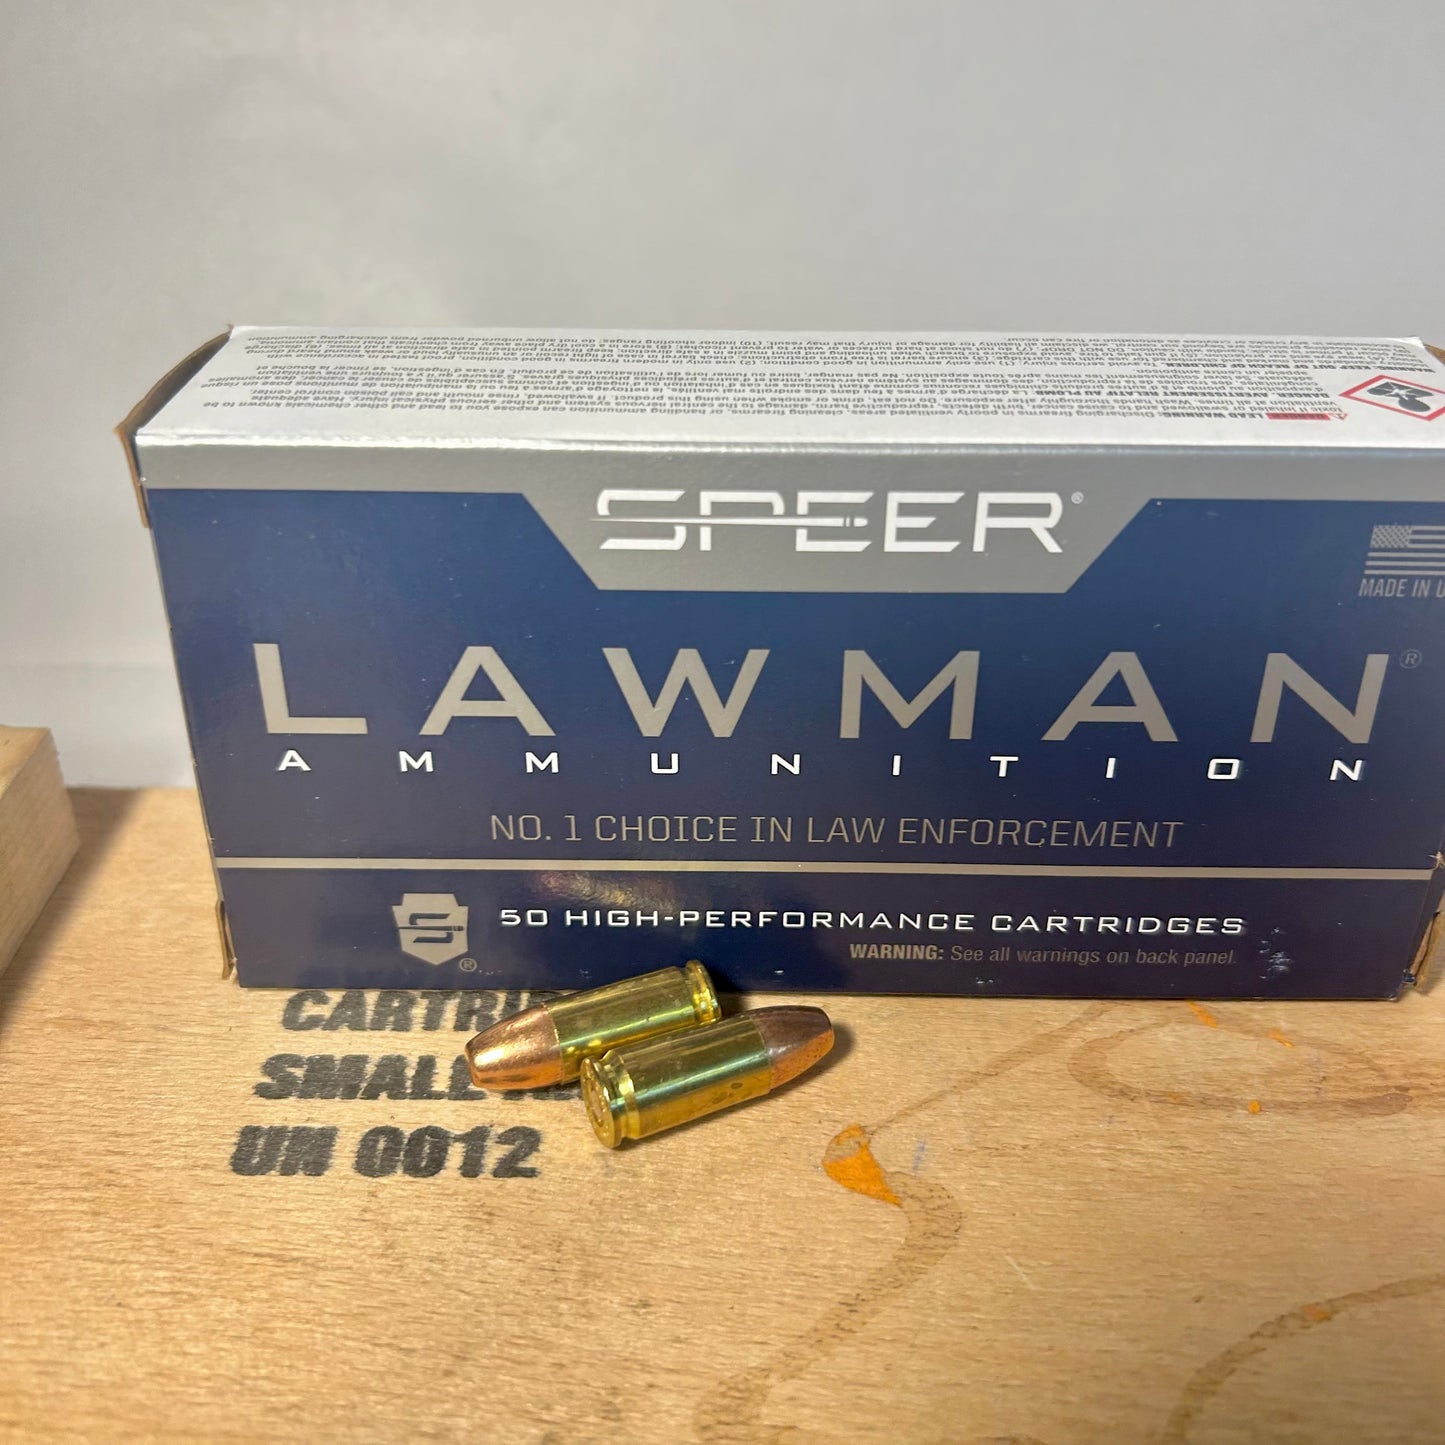 50 Round Box Speer Lawman 9mm Luger Ammo 147gr TMJ Subsonic - 53620